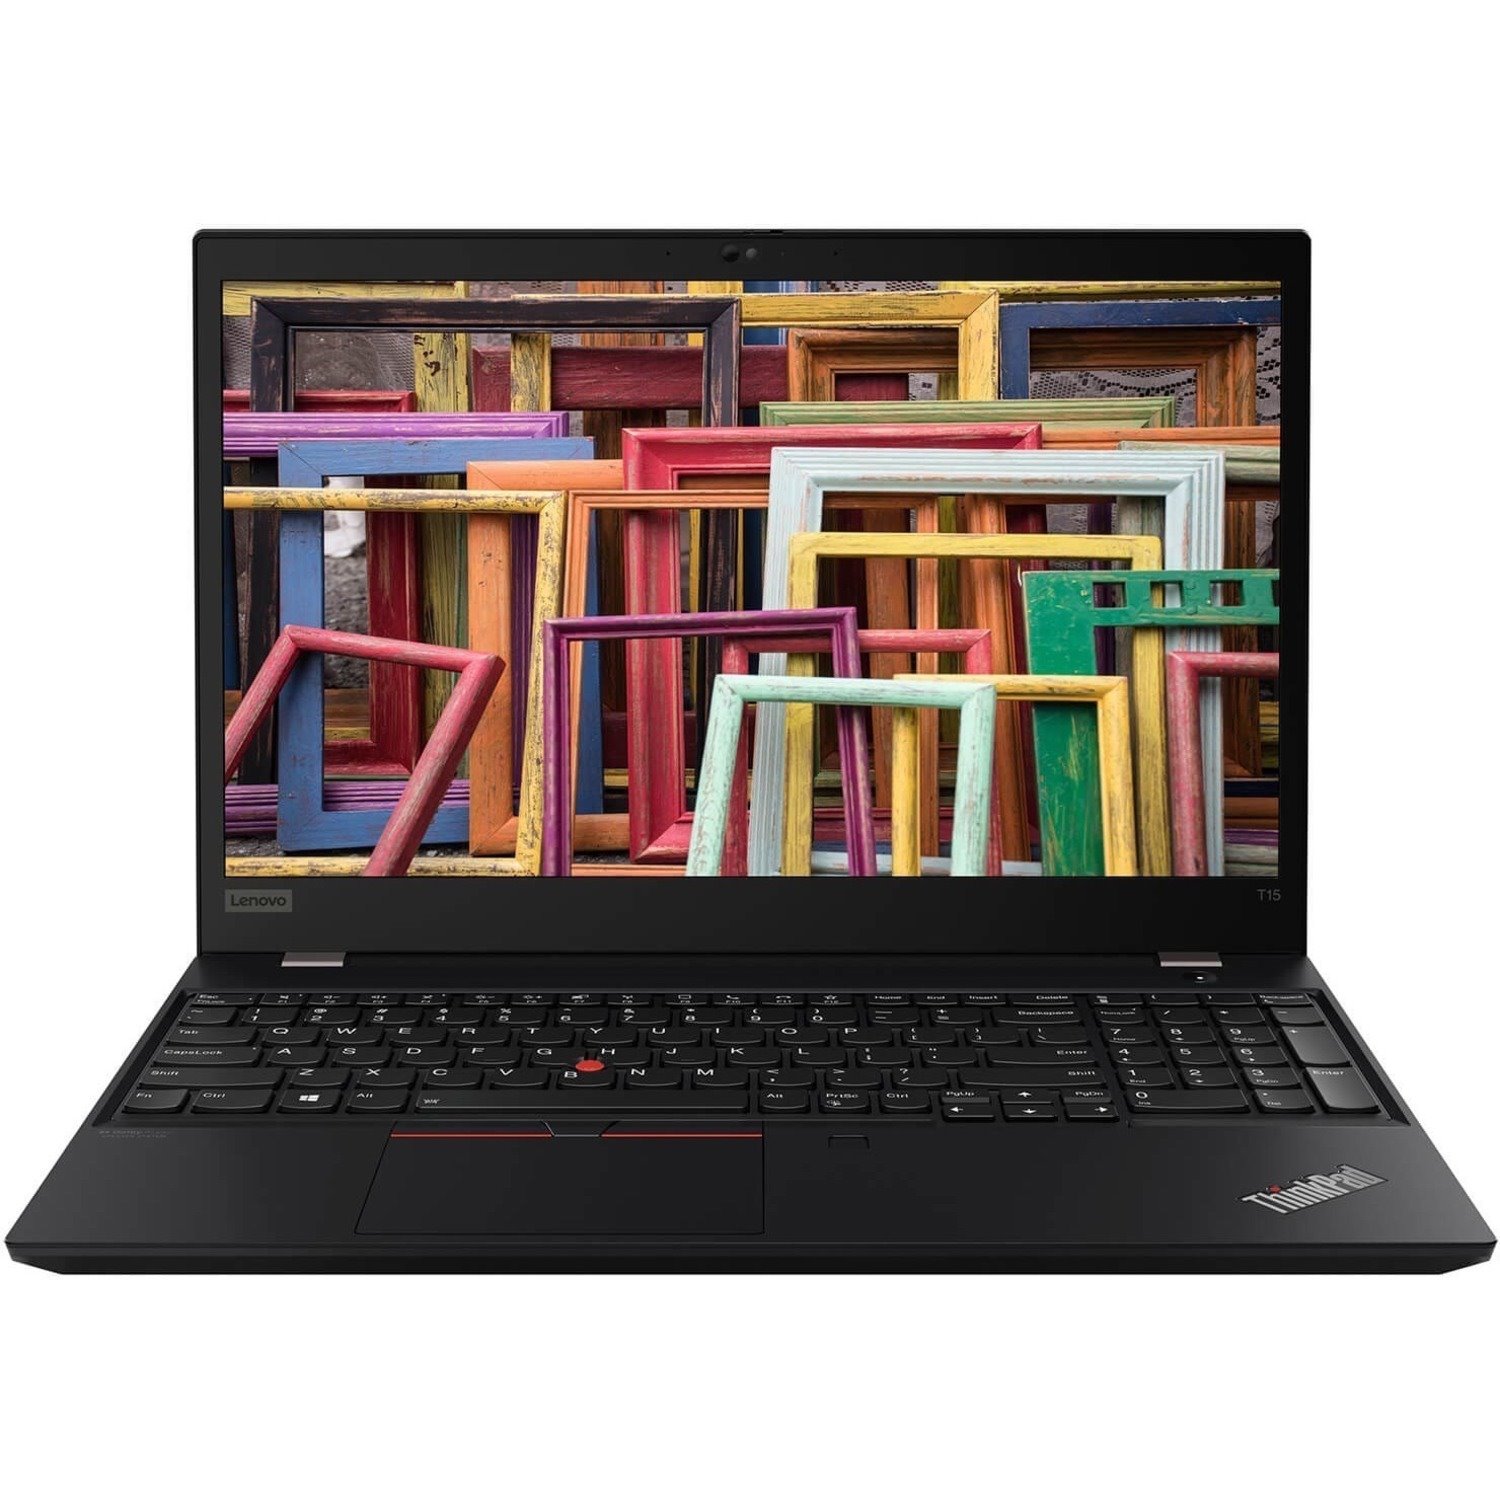 Lenovo ThinkPad T15 Gen 2 20W400LKUS 15.6" Notebook - Full HD - 1920 x 1080 - Intel Core i5 11th Gen i5-1145G7 Quad-core (4 Core) 2.6GHz - 16GB Total RAM - 256GB SSD - Black - no ethernet port - not compatible with mechanical docking stations, only supports cable docking